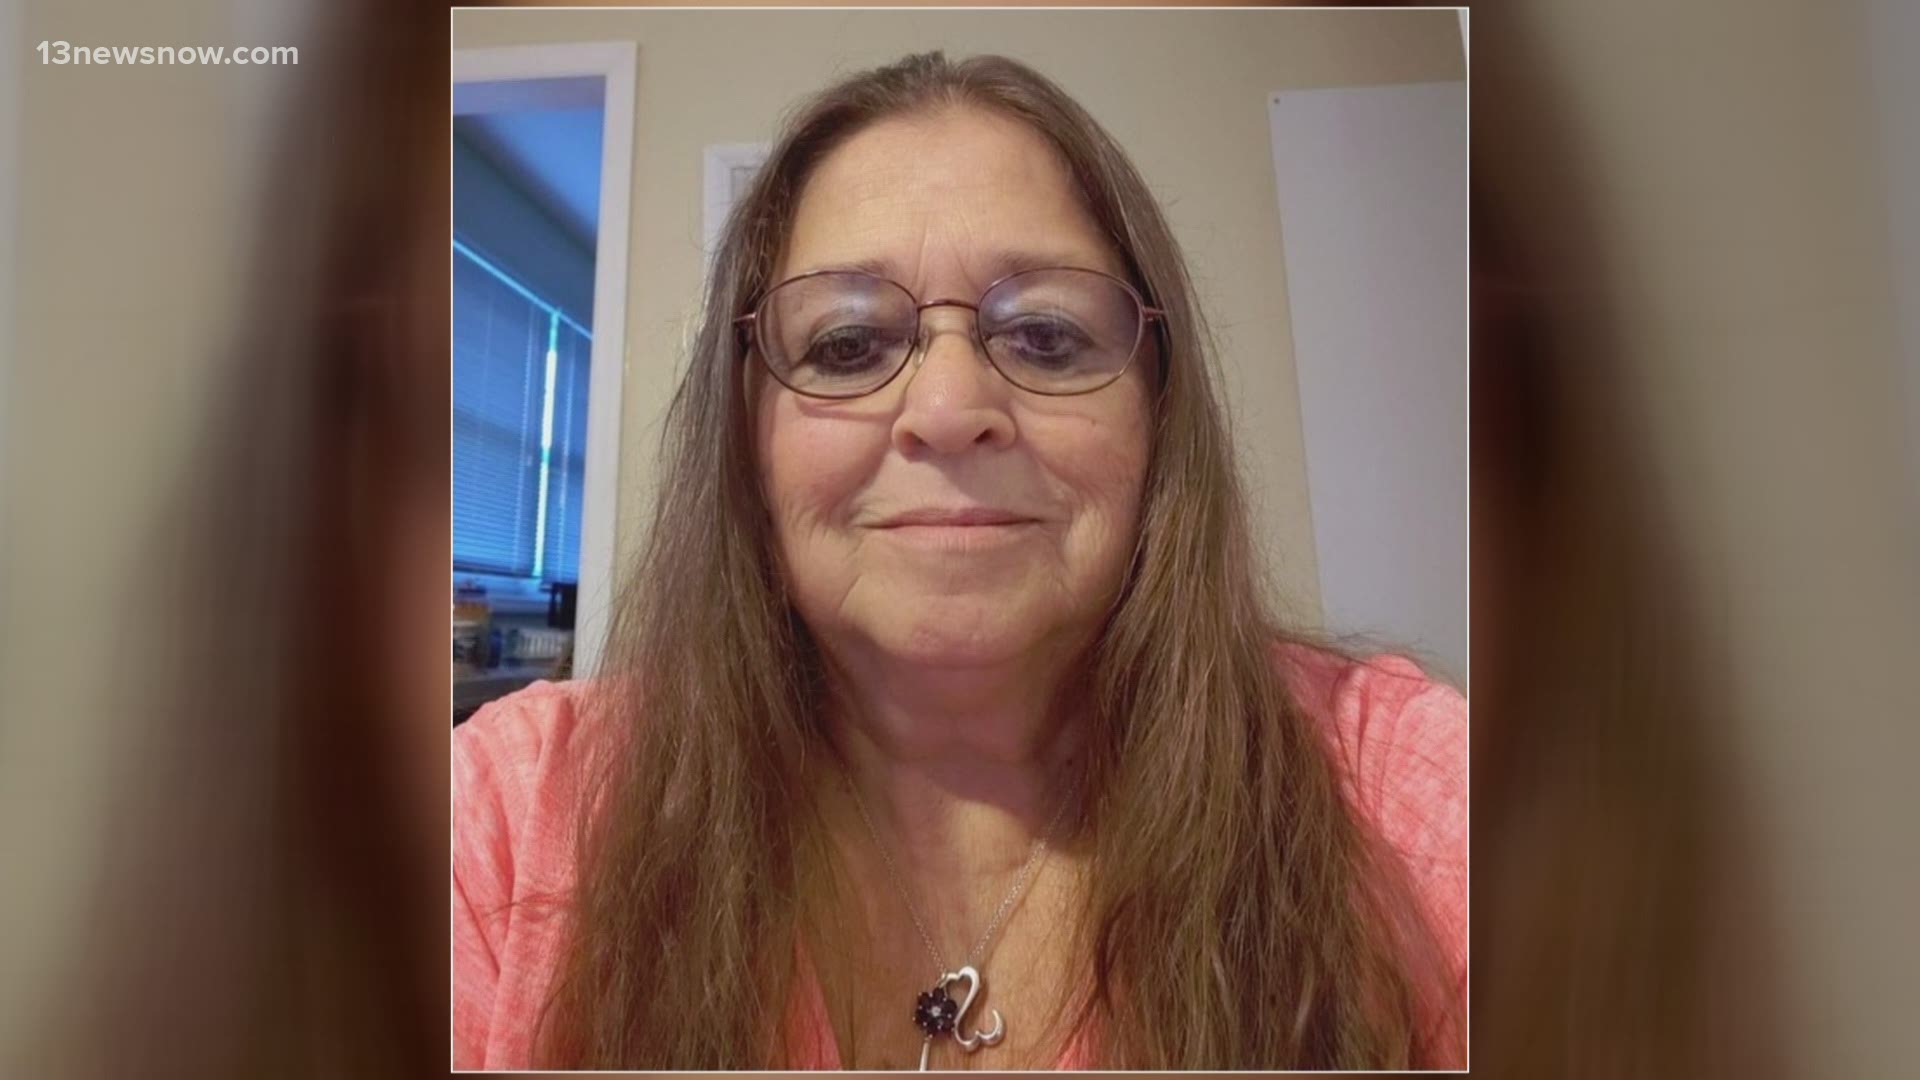 On Monday, Detectives reported 61-year-old Laura Miles missing. Later that day, they found her body off Taylor Road, not far from where she lived.